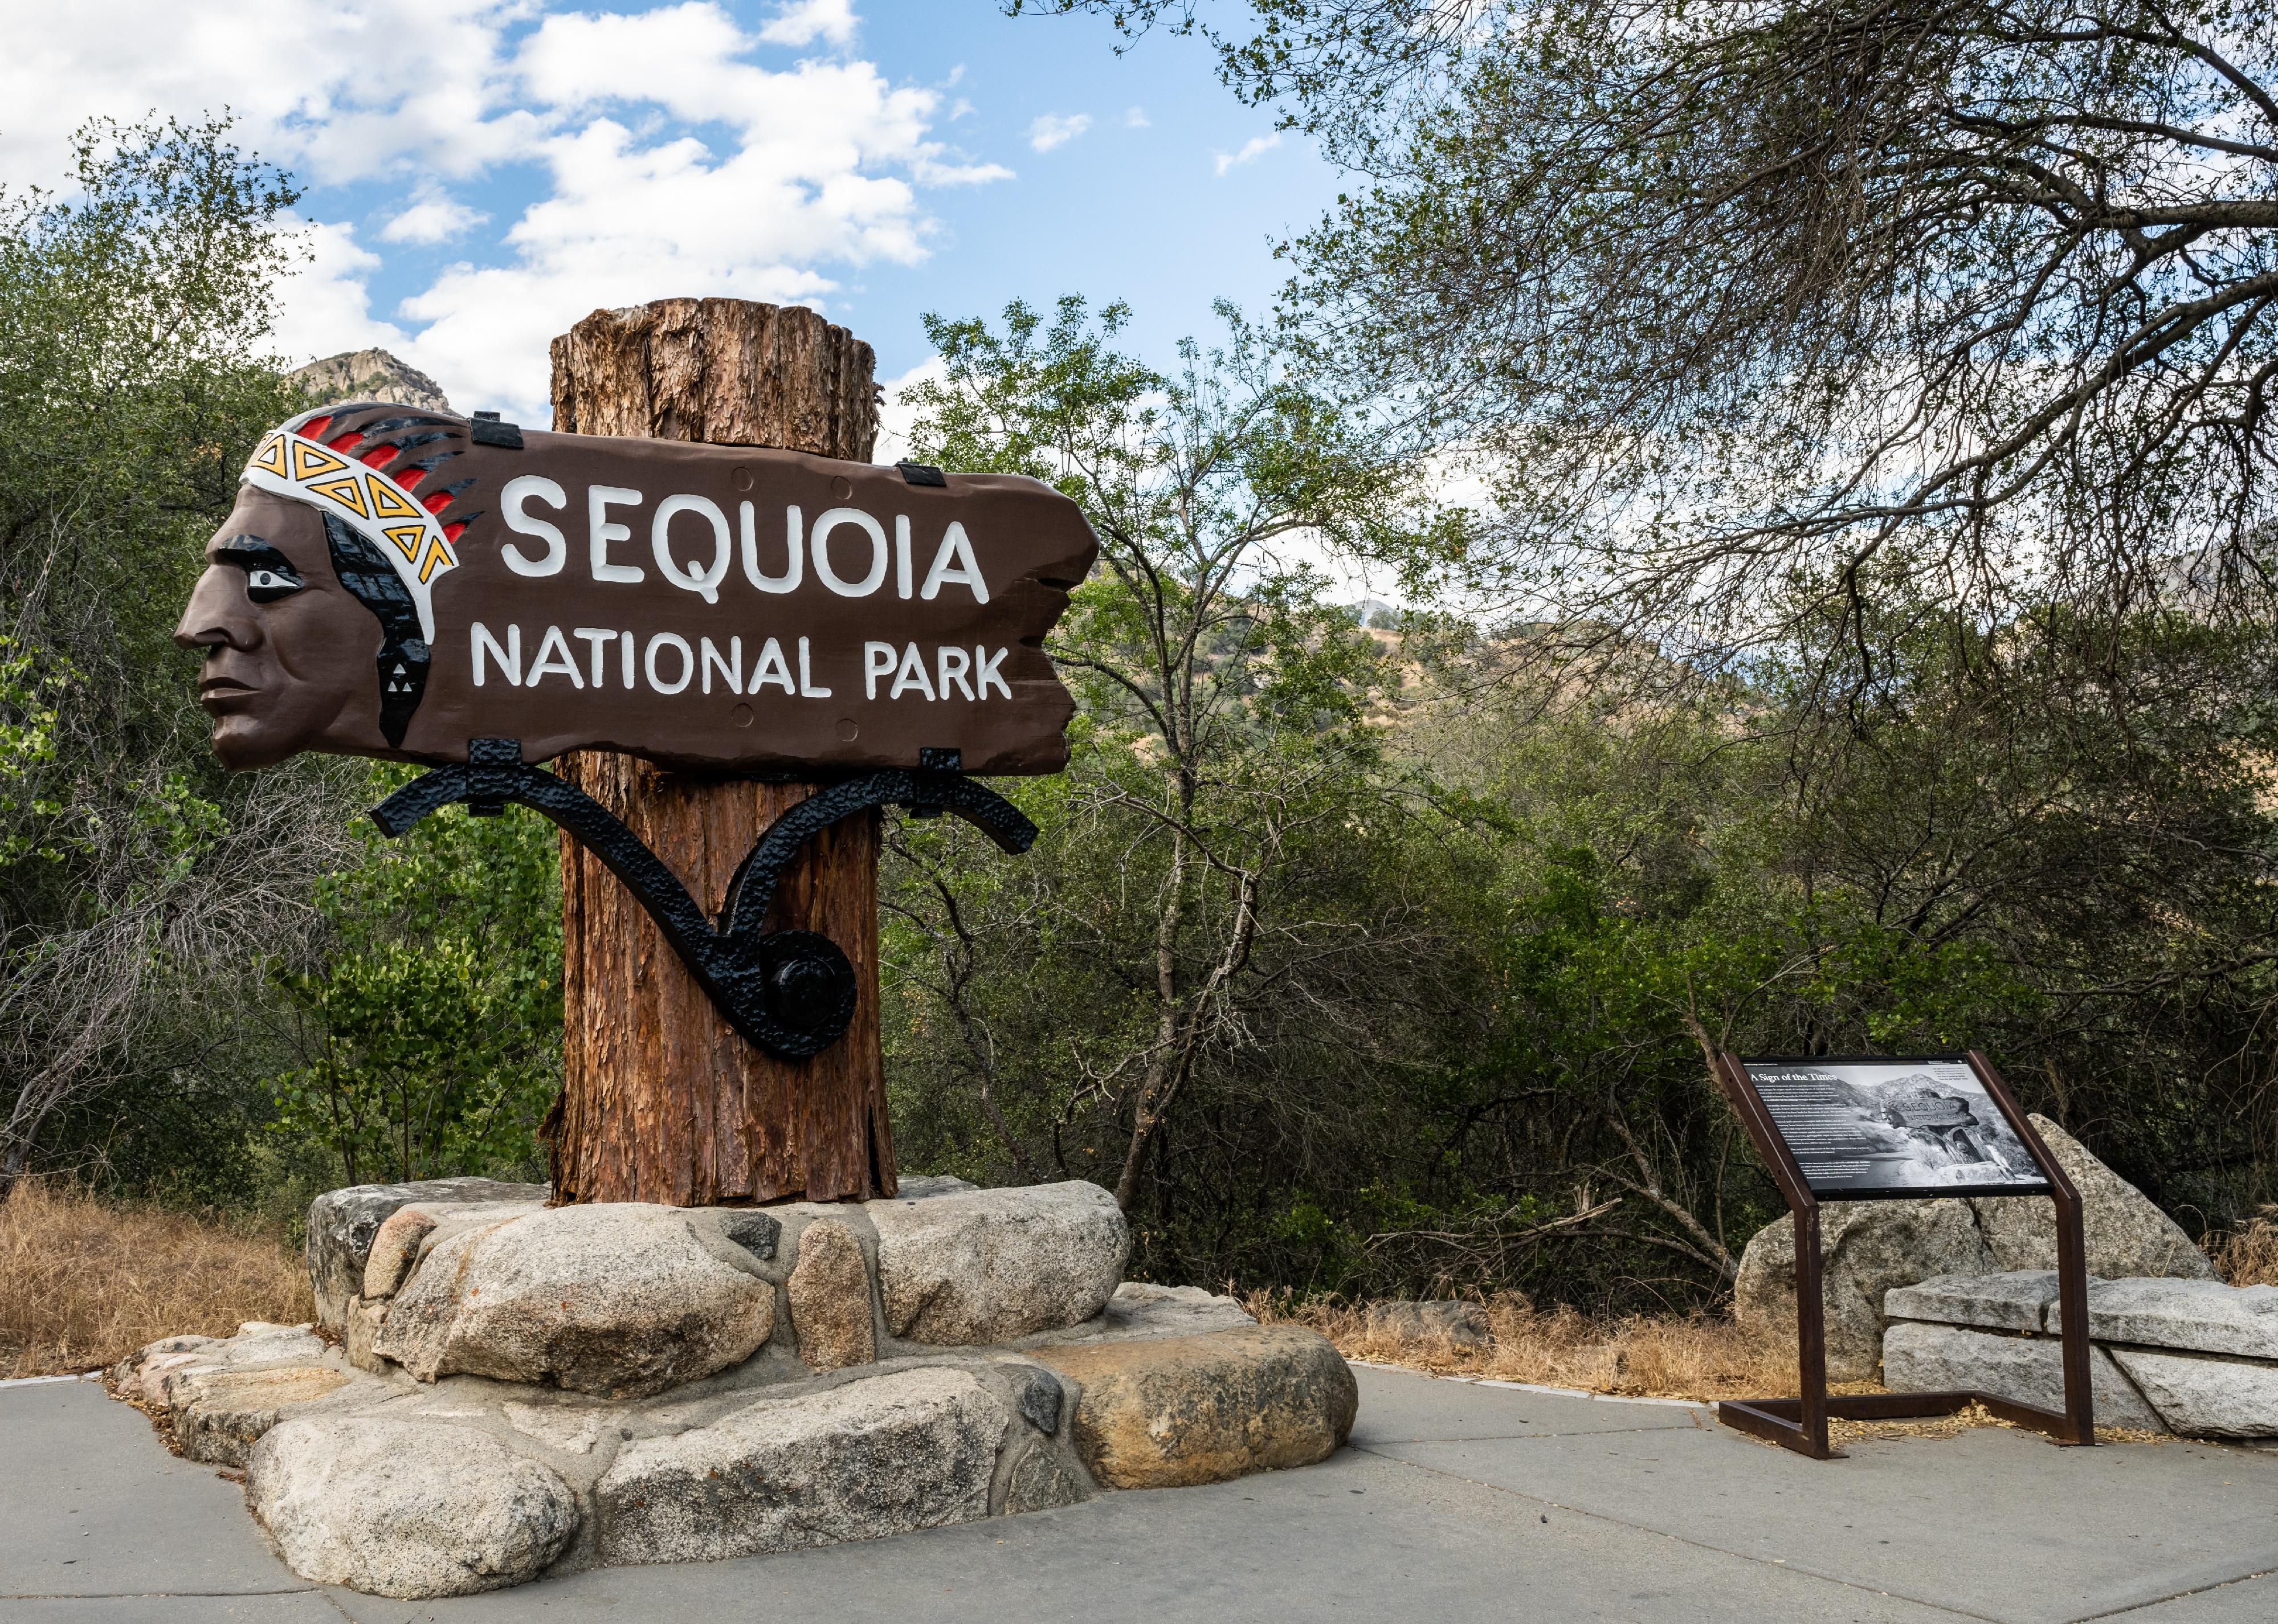 Sequoia National Park welcome sign with historical marker to the right.